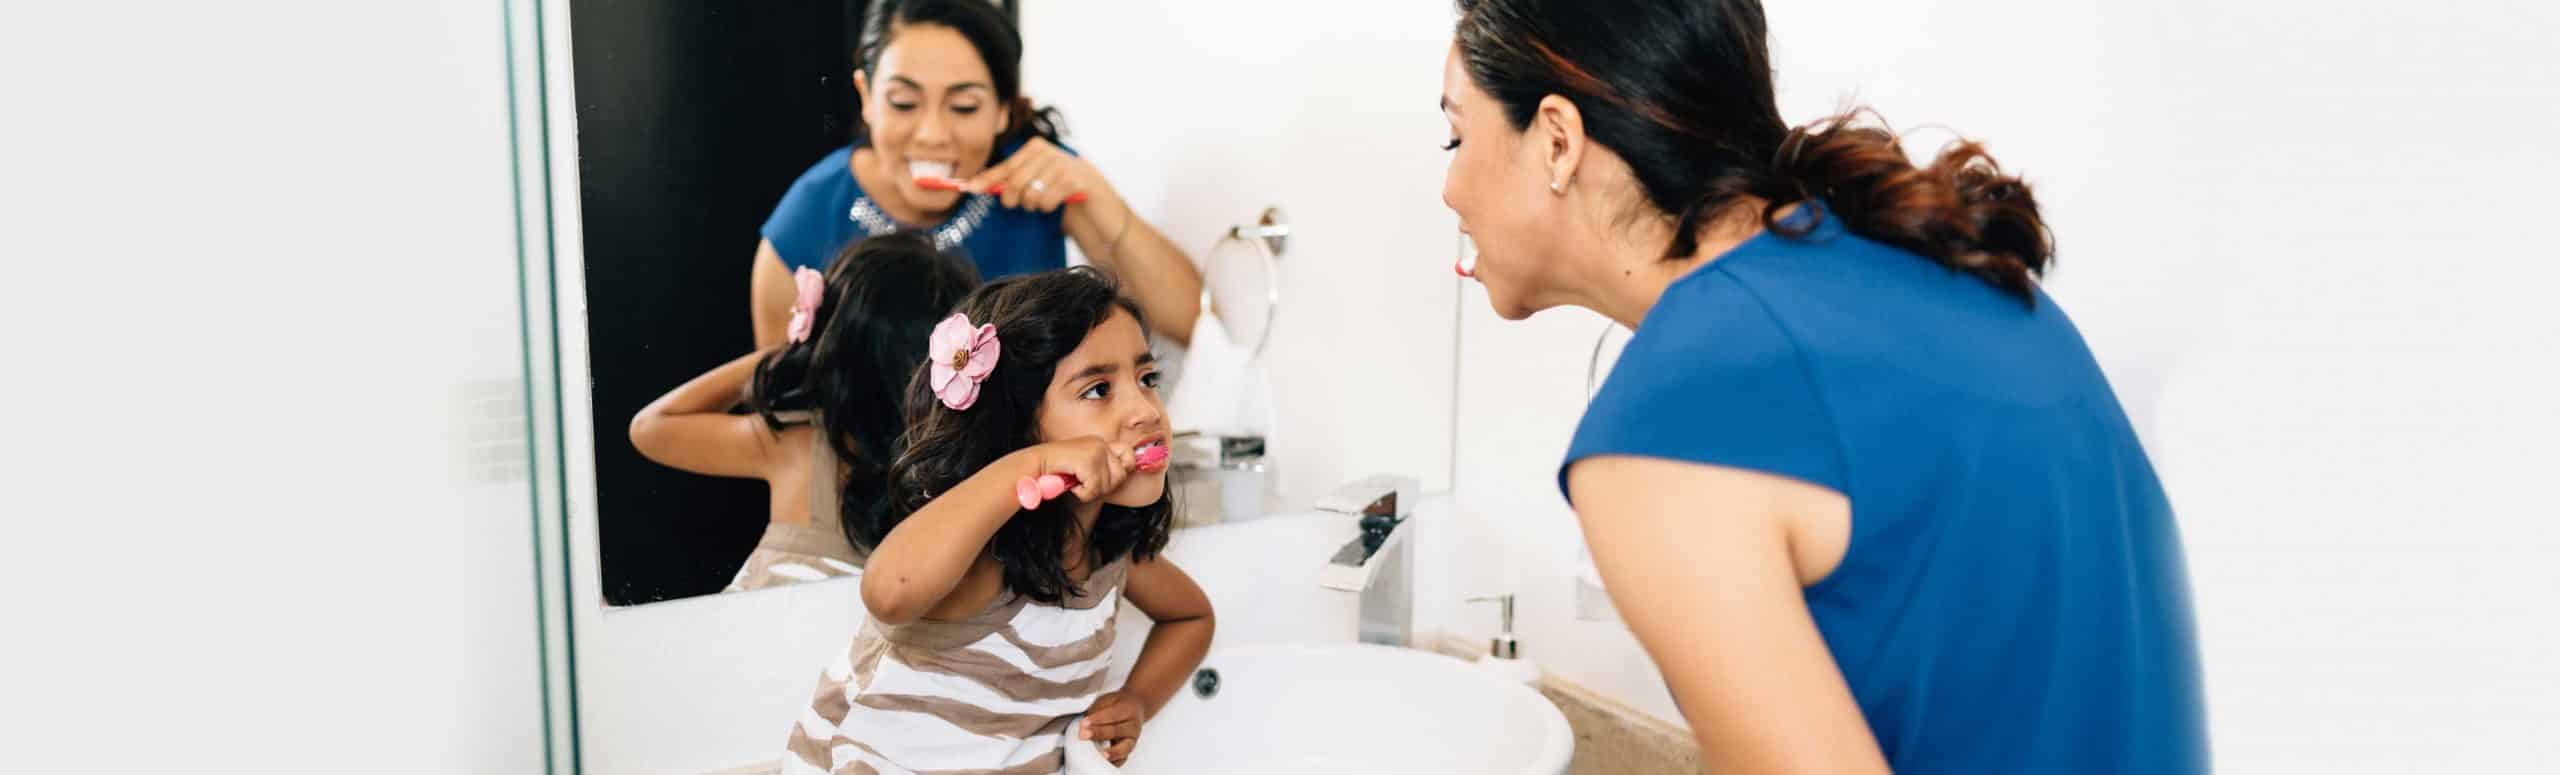 Mother and child brushing teeth together while saving water